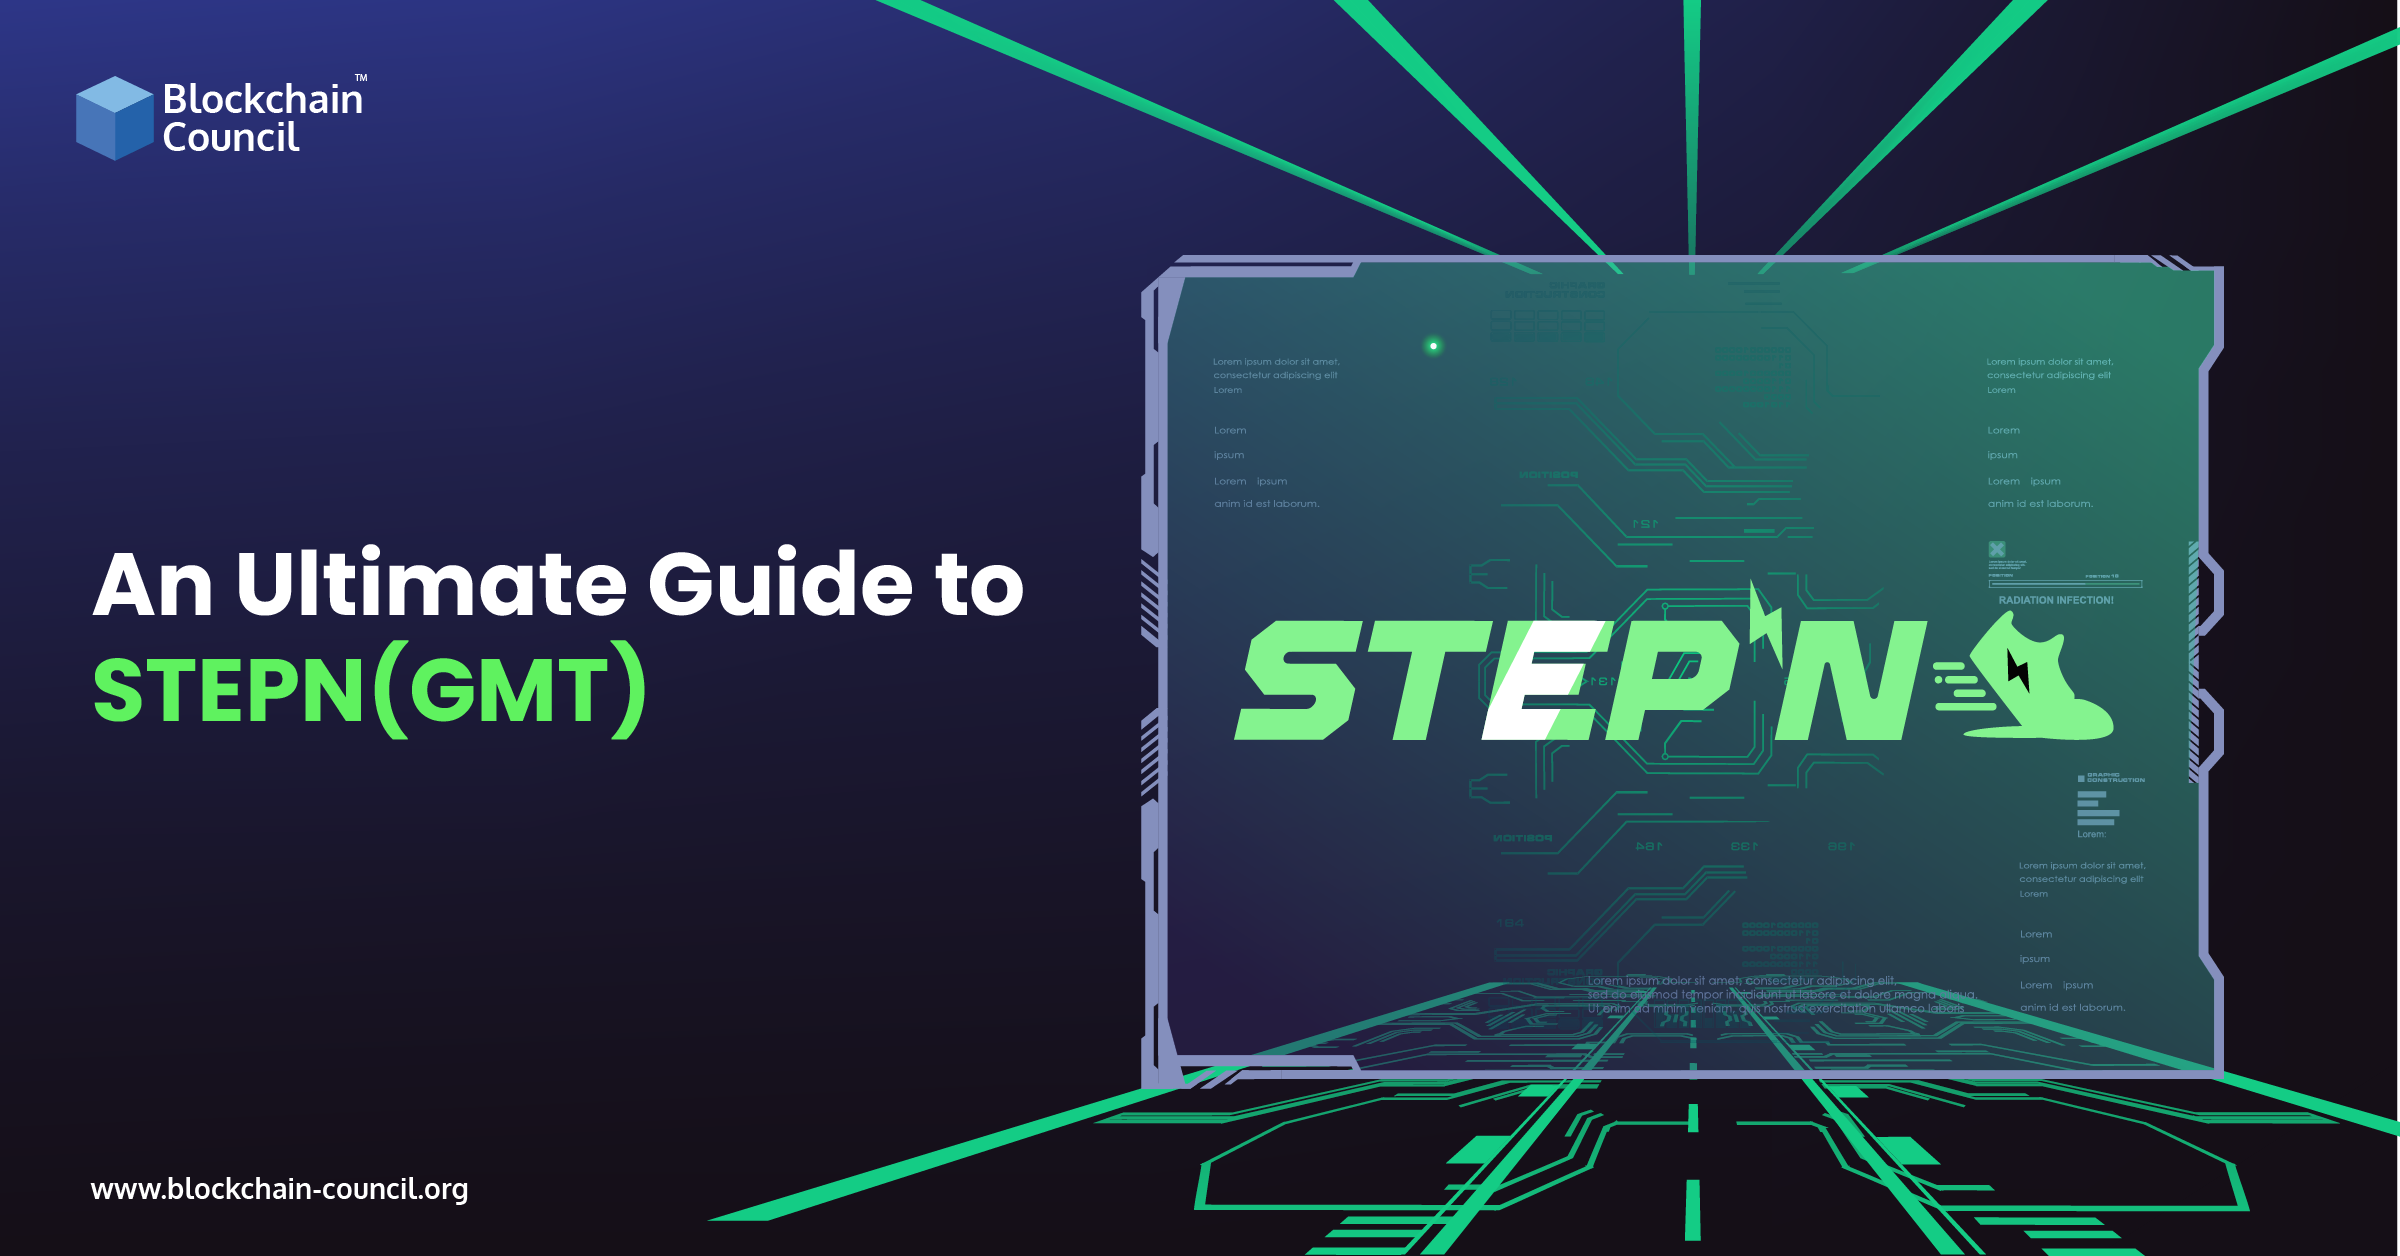 Introducing StepN: The Web3 Lifestyle App That Pays for Exercising